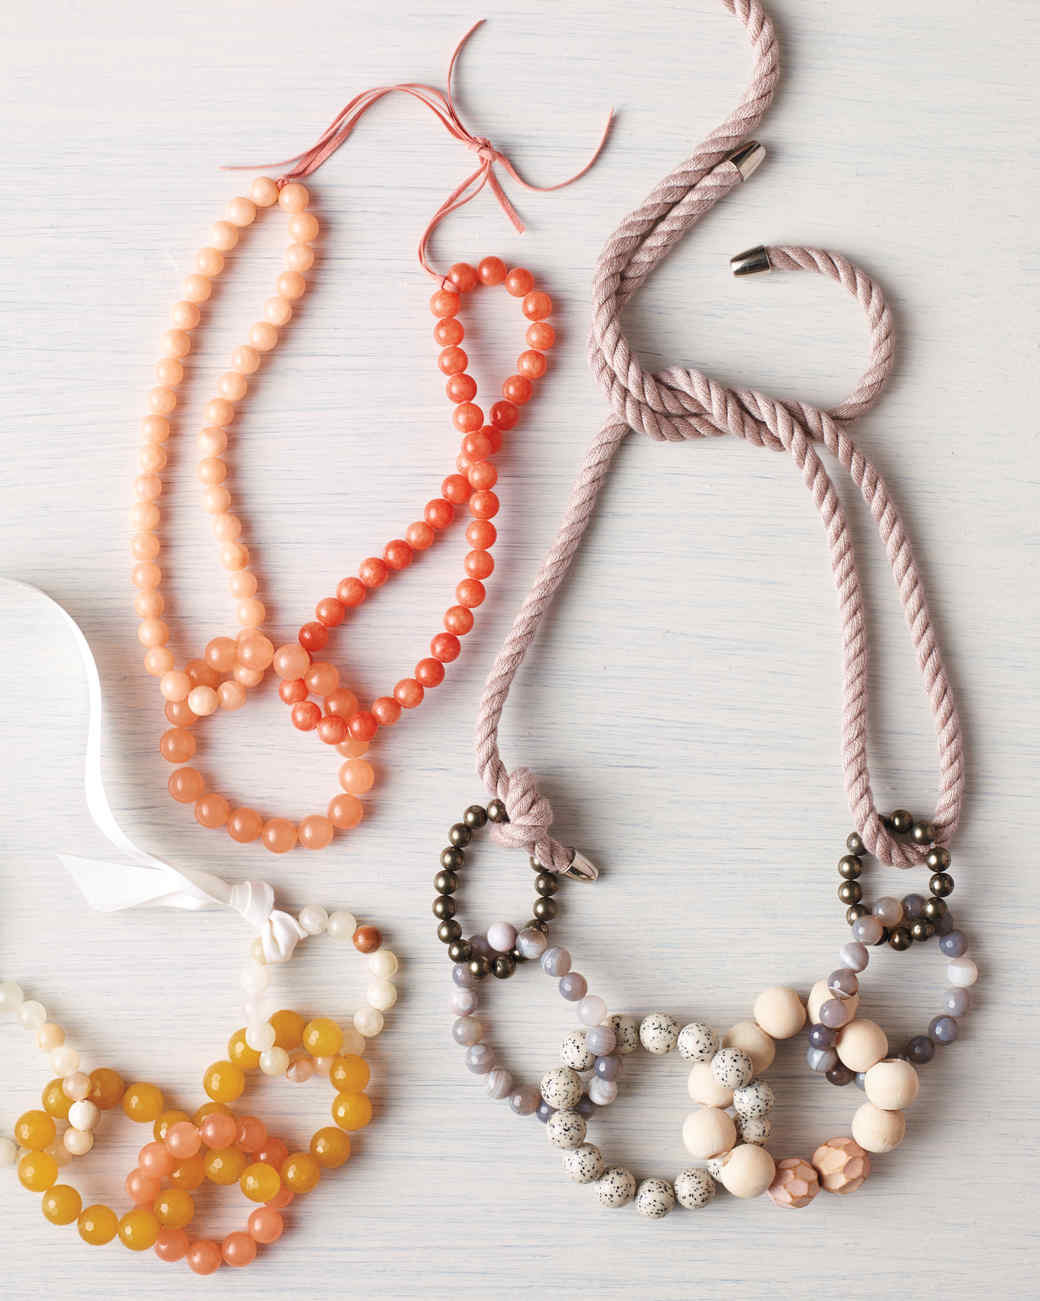 Diy Jewelry
 DIY Jewelry Beaded Necklaces Make the Chicest Links